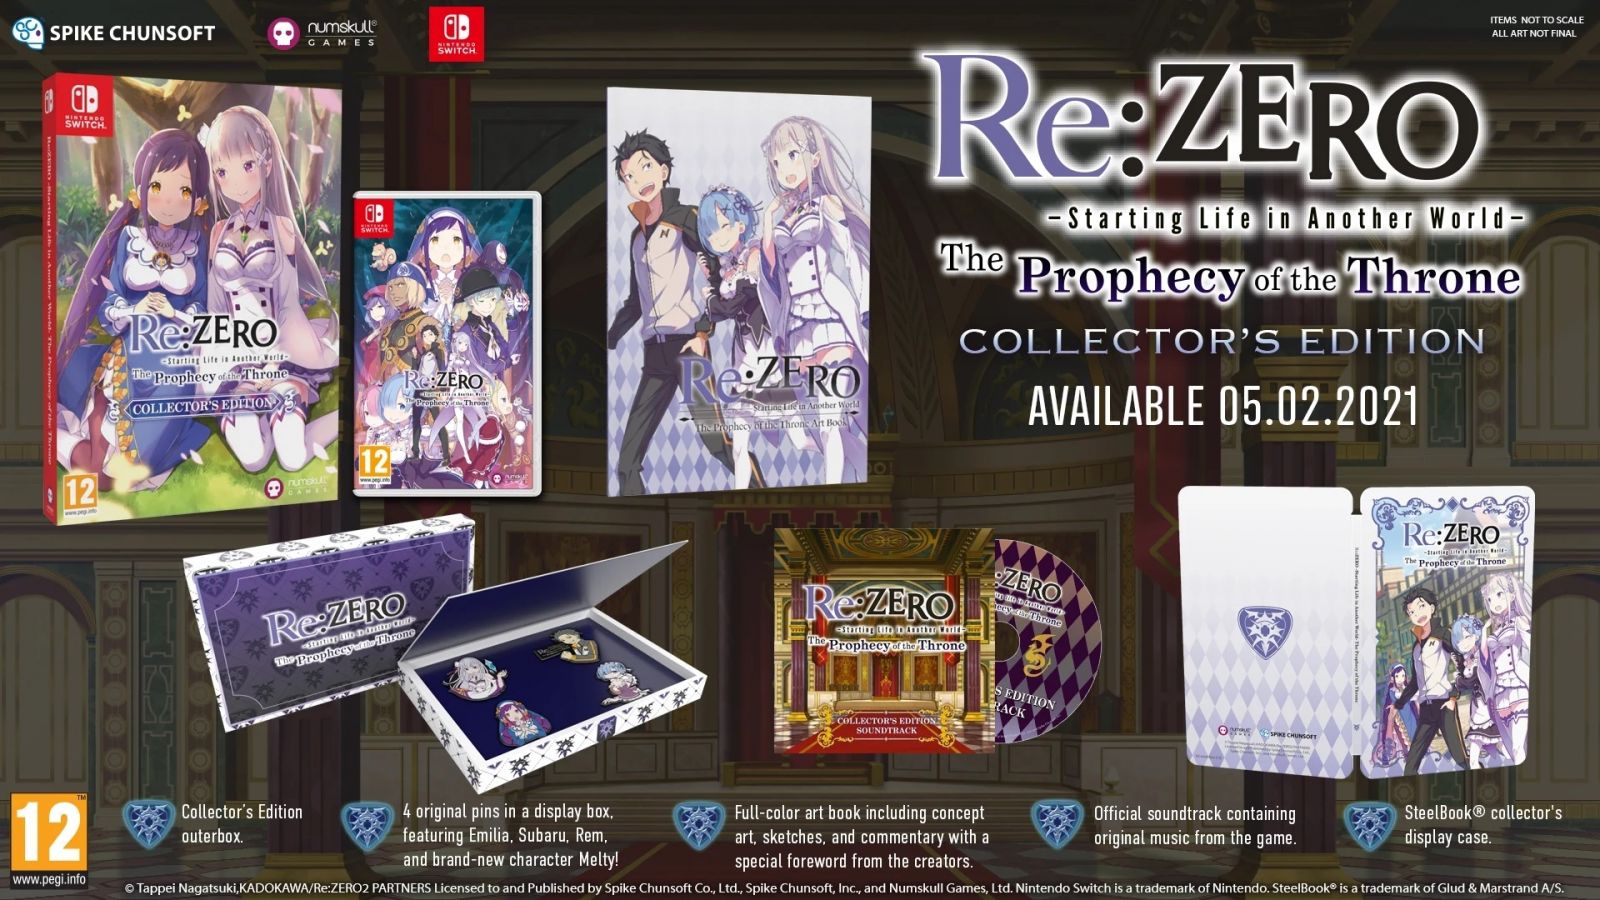 Re:Zero - The Prophecy of the Throne Collector's Edition (Nintendo Switch)